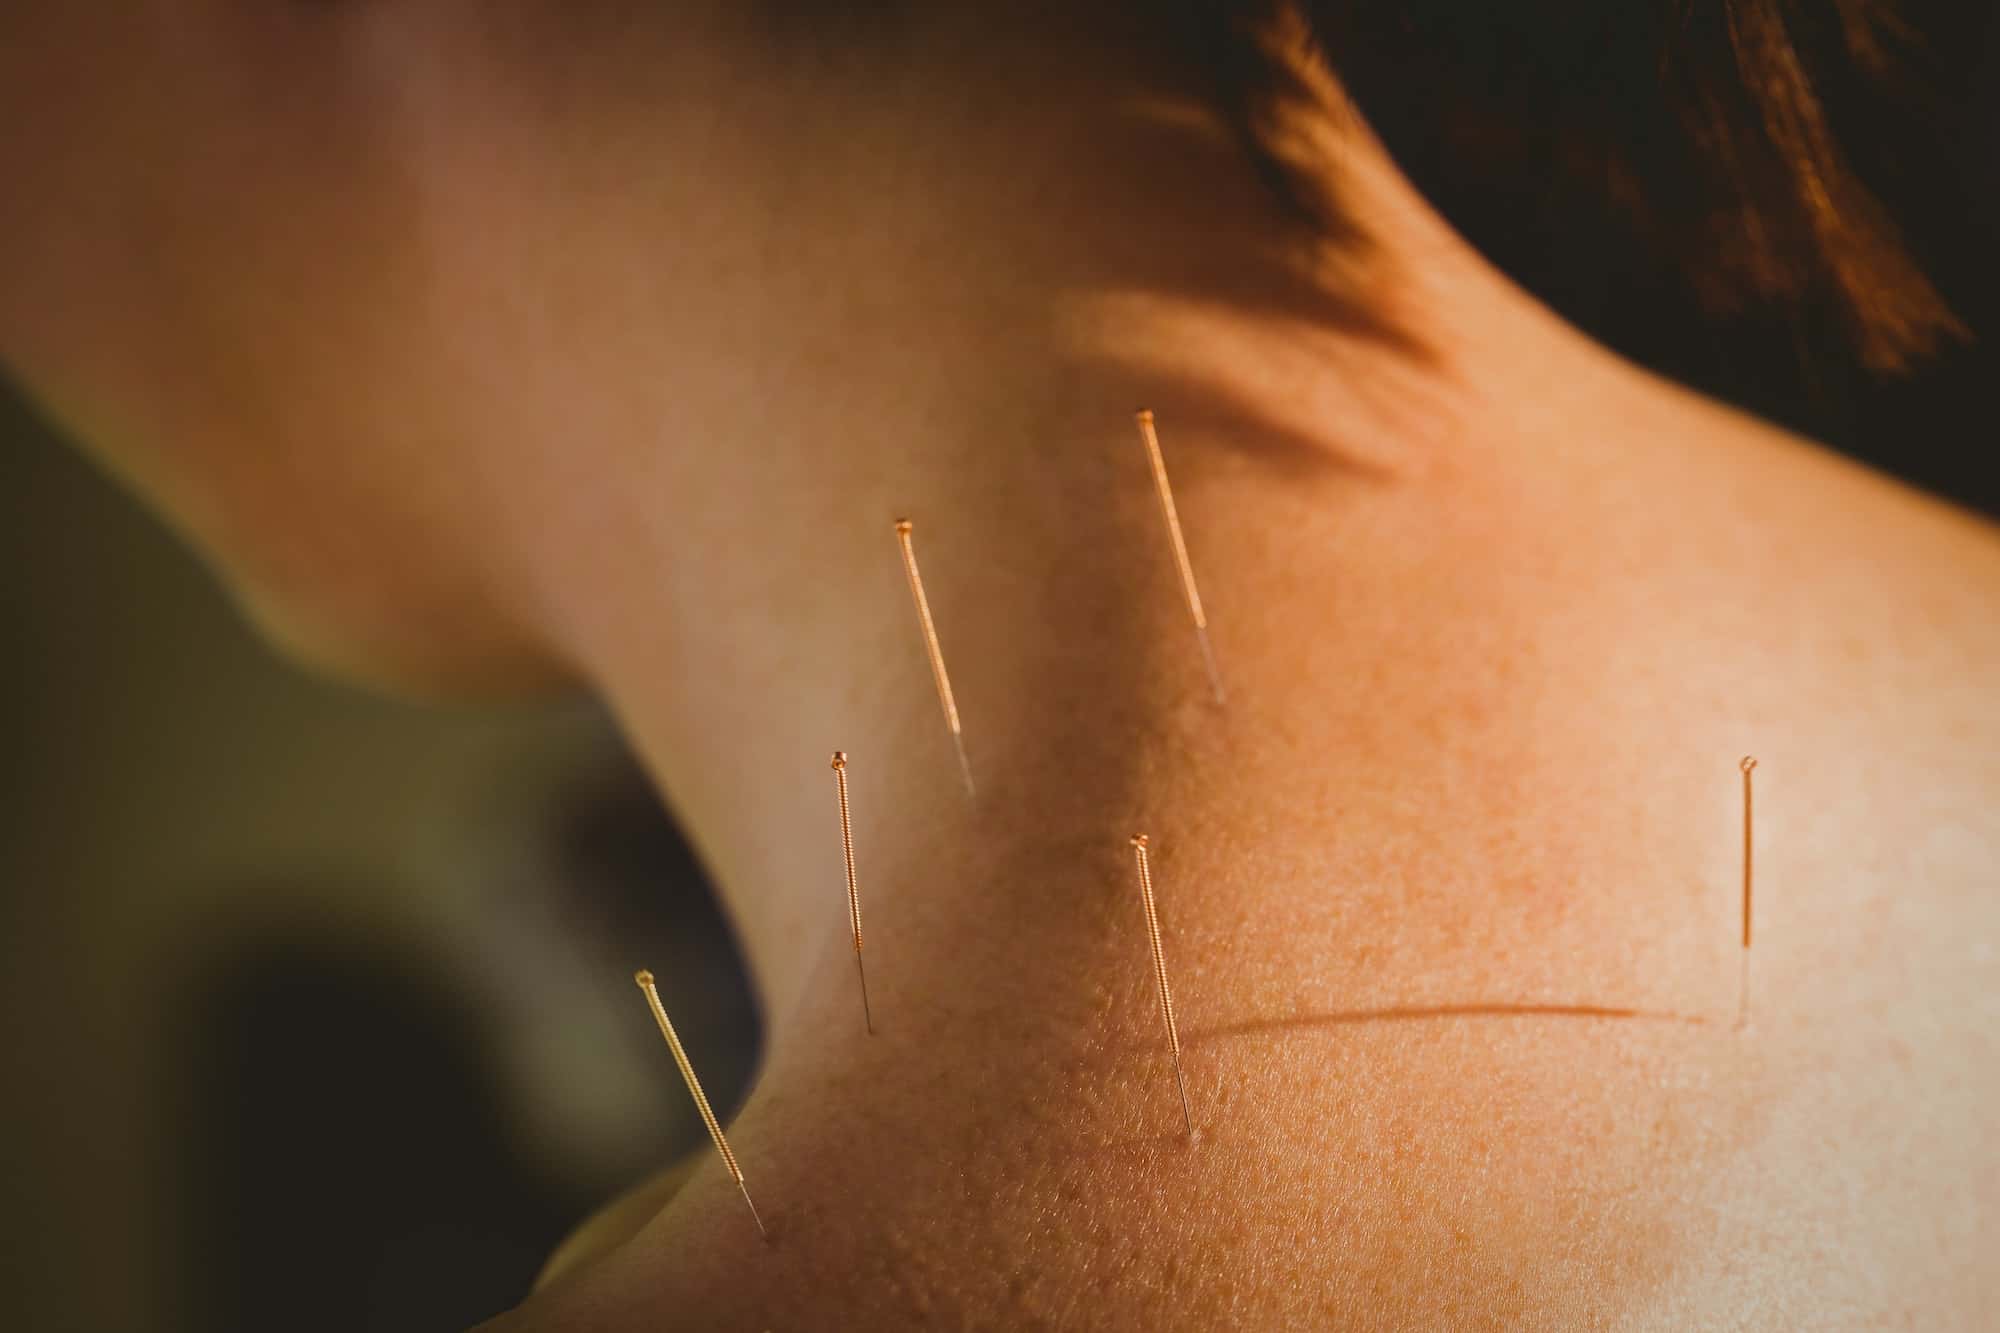 Acupuncture with Electric Stimulation - Acupuncture & Physical Therapy  Specialist